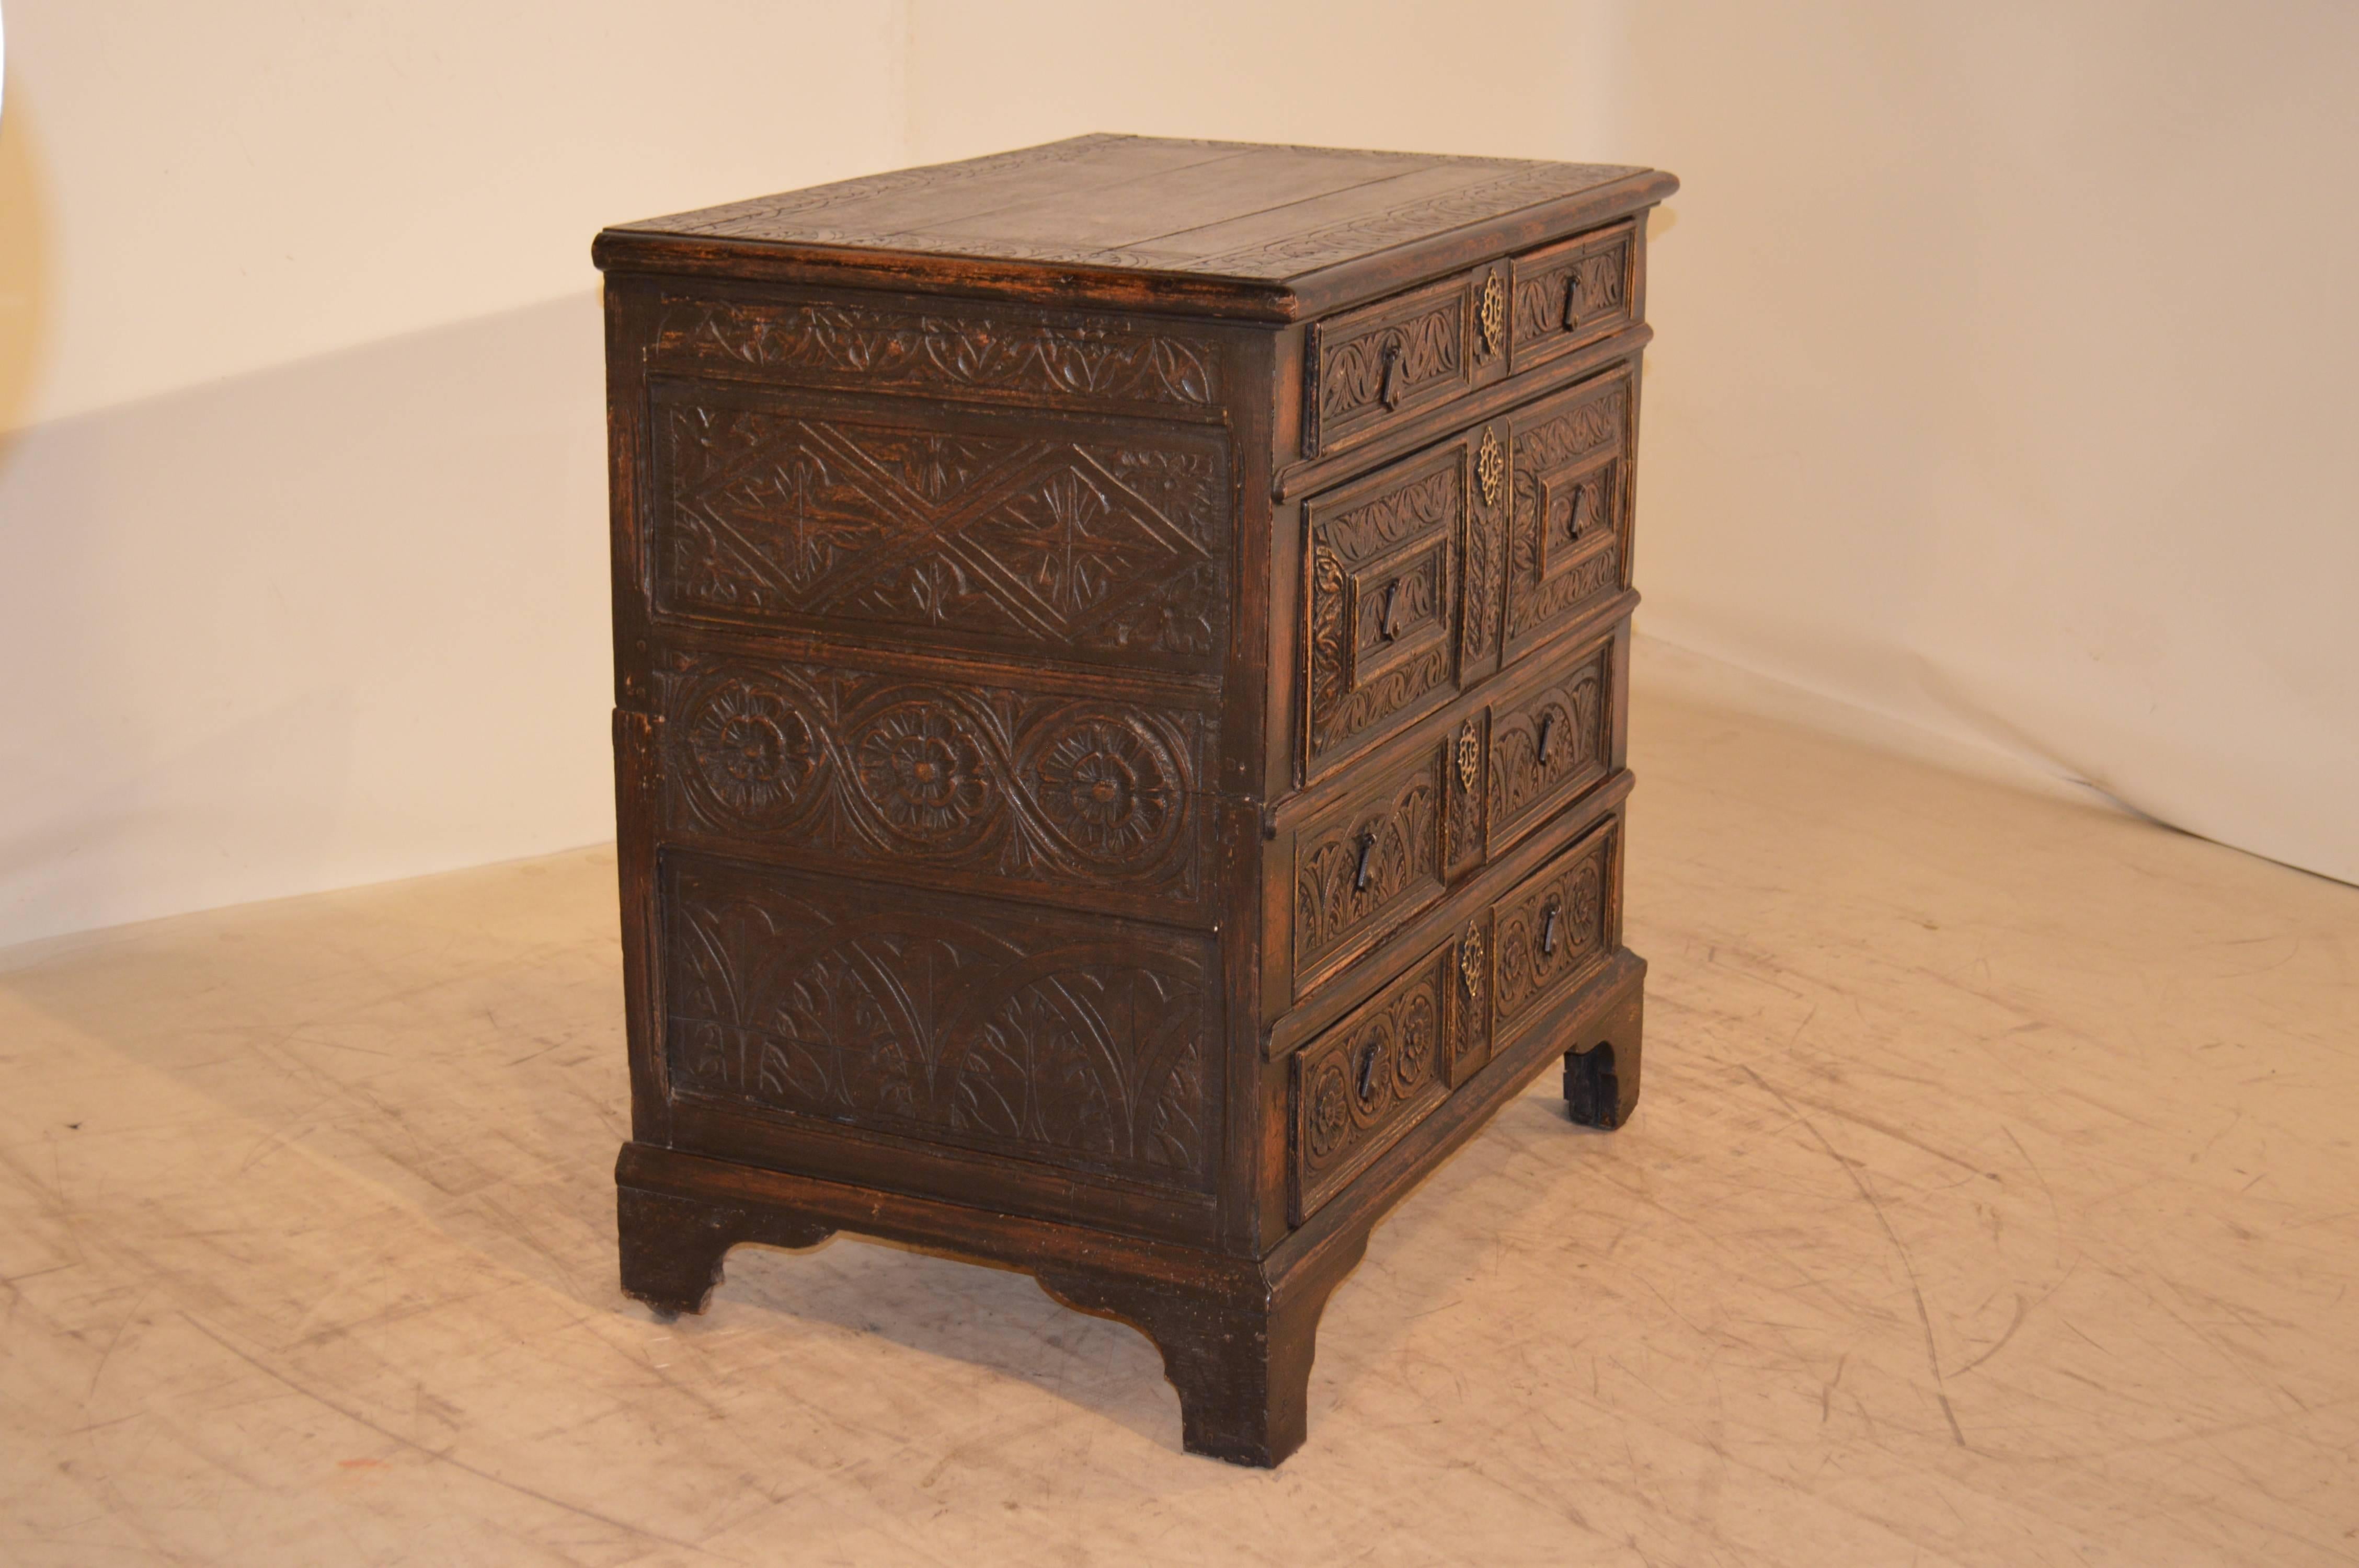 Late 17th- Century carved oak chest of drawers.  The top is made up of planks with a beveled edge and a carved banded top.  The case has paneled sides which are hand carved with wonderful decoration, and the front contains four drawers, which are